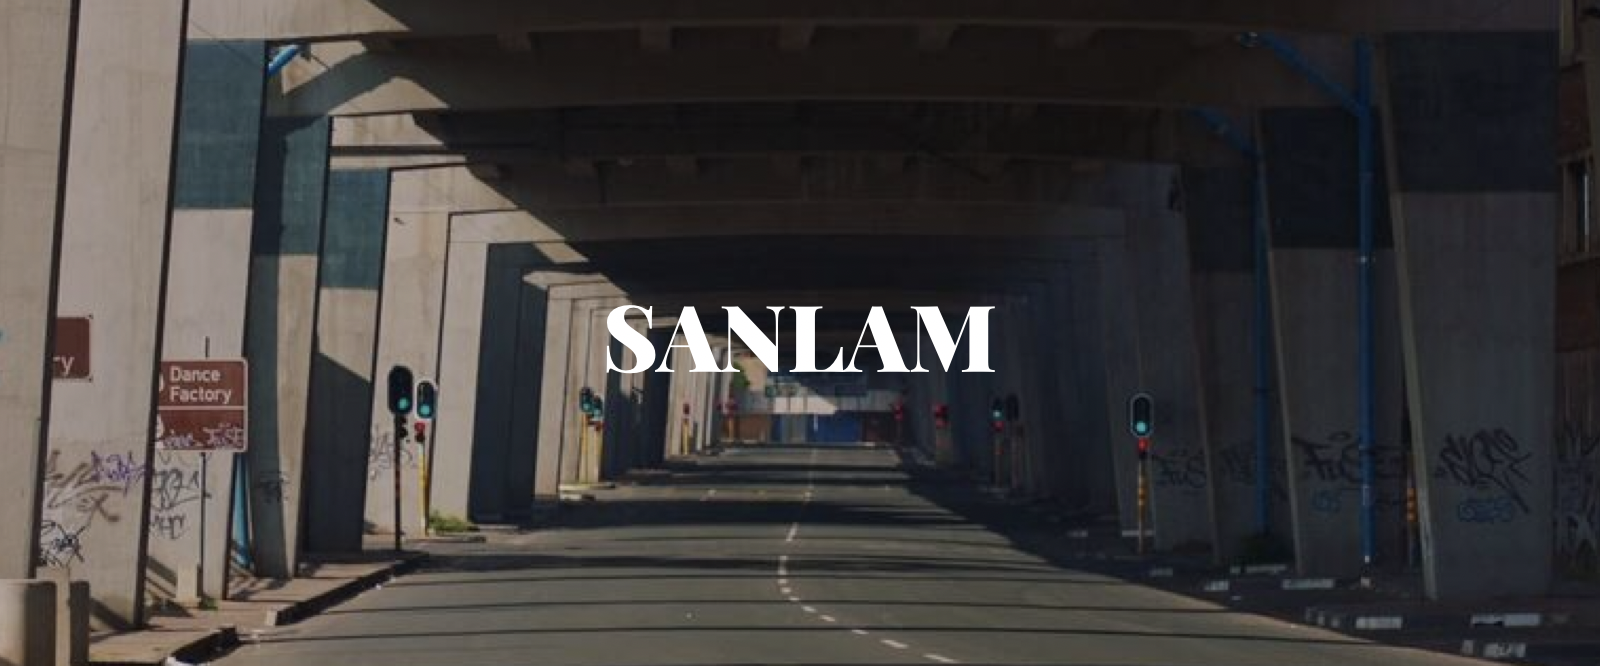 SANLAM_overfied.PNG